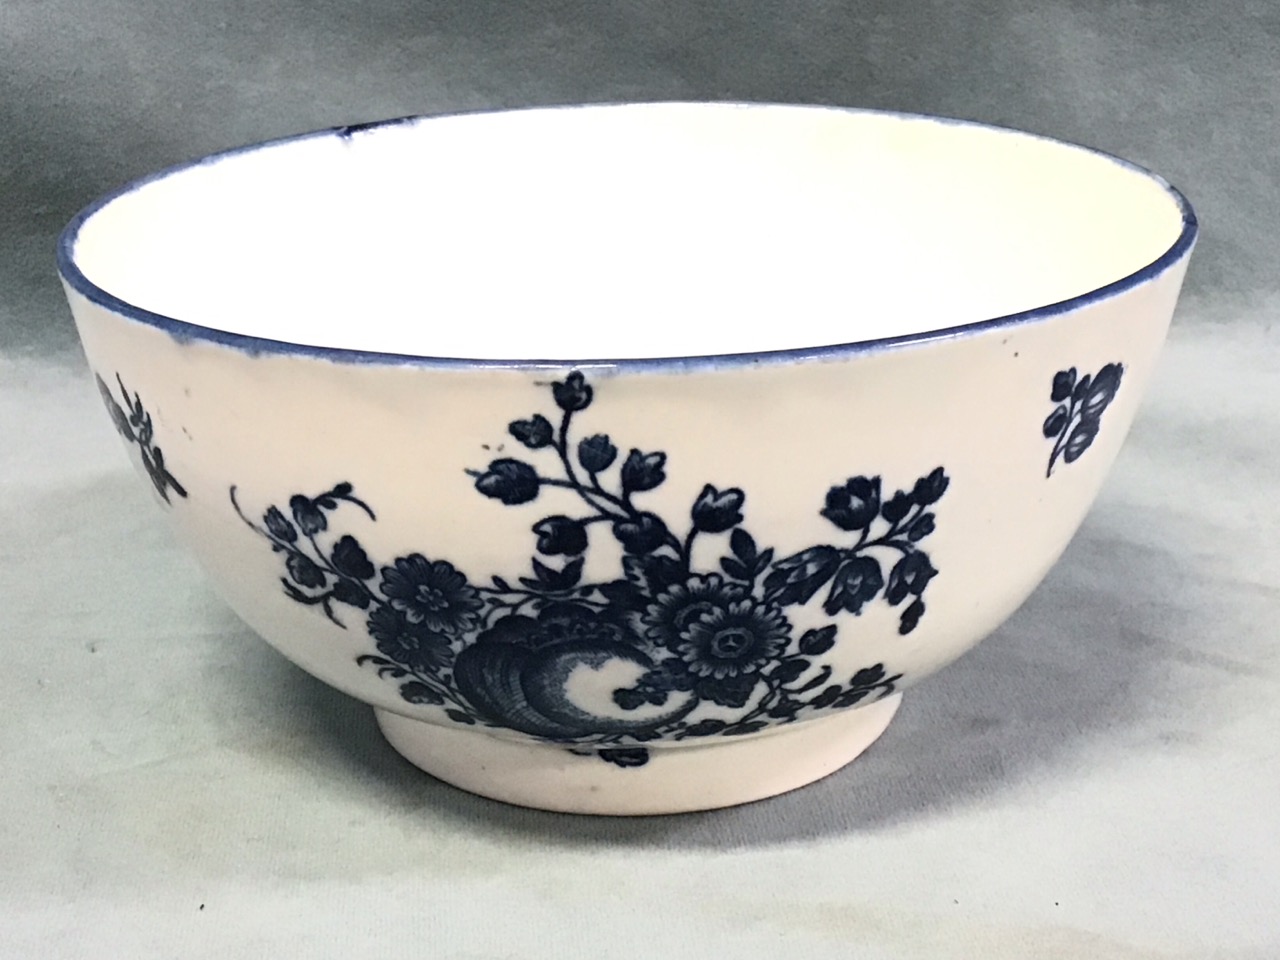 An C18th Caughley blue & white porcelain bowl decorated in the peach pattern - S mark. (6in)